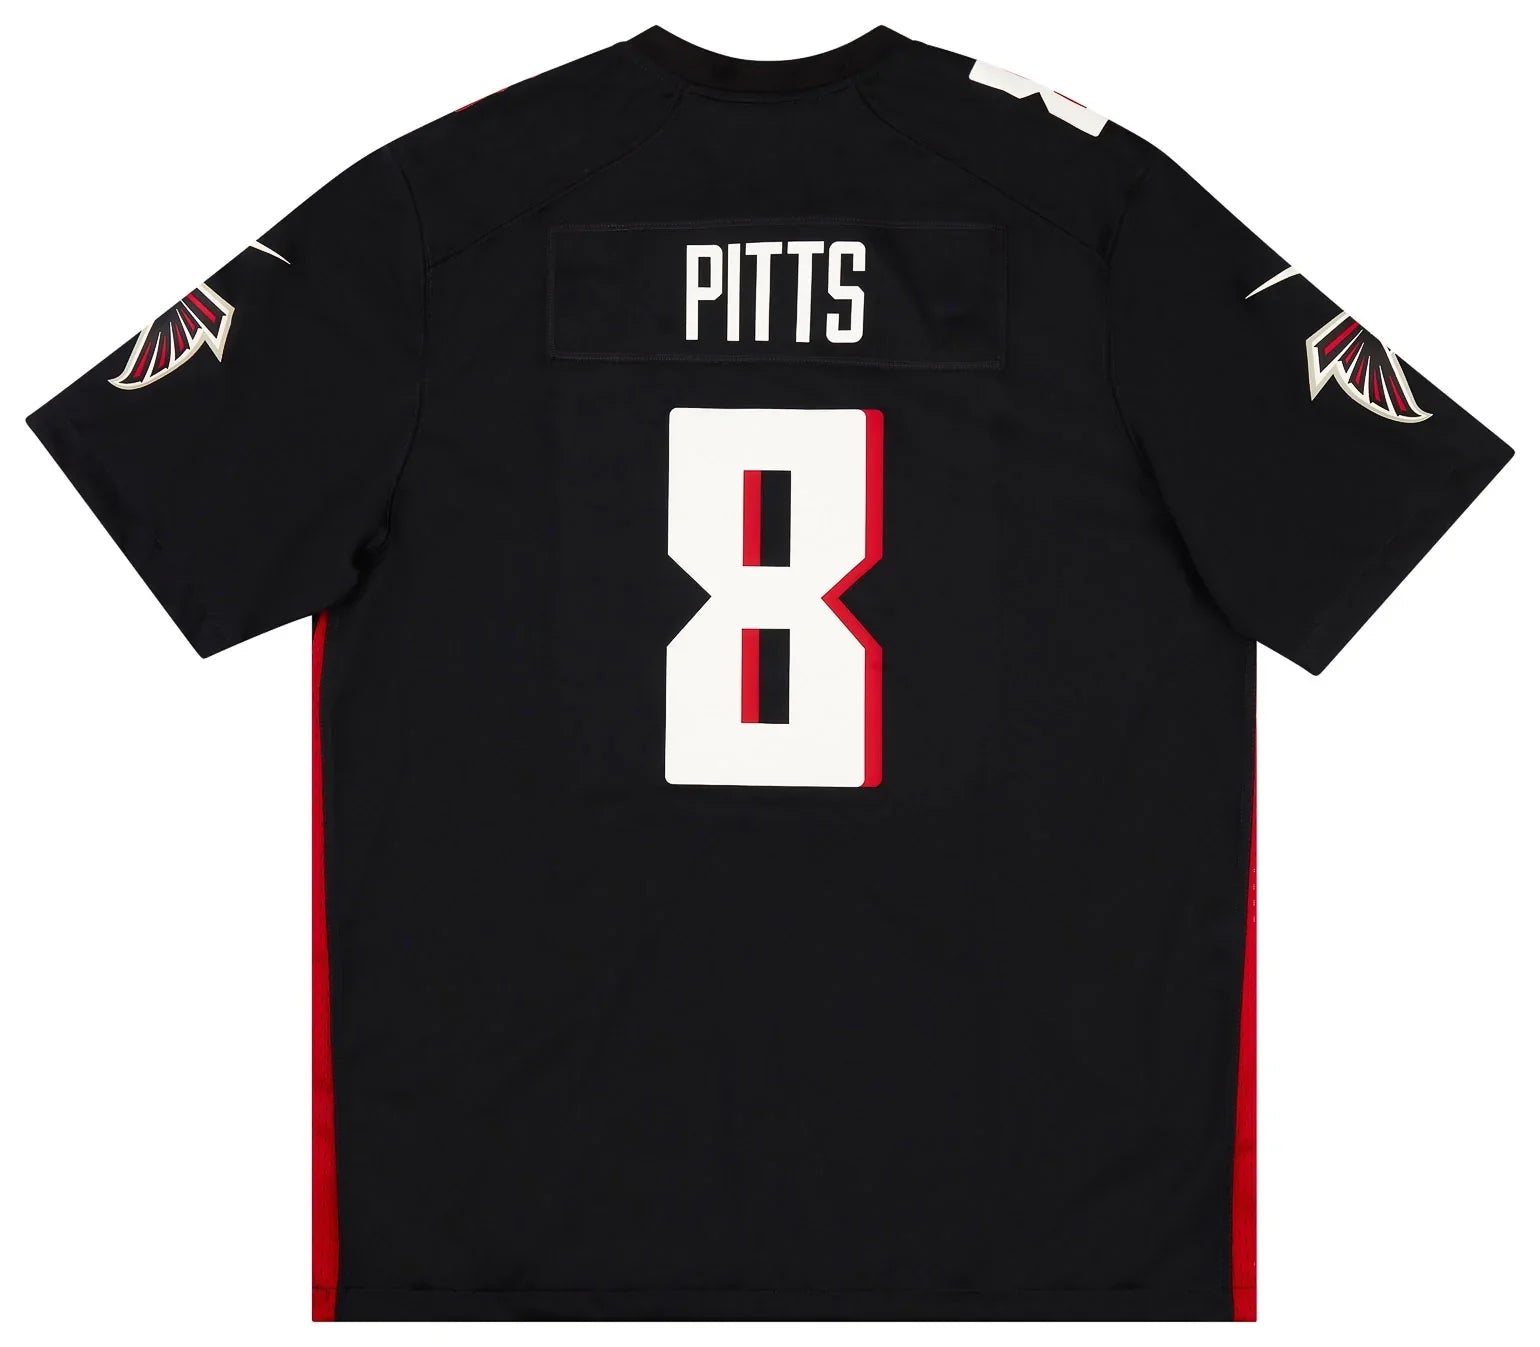 2021-23 ATLANTA FALCONS PITTS #8 NIKE GAME JERSEY (HOME) S - W/TAGS